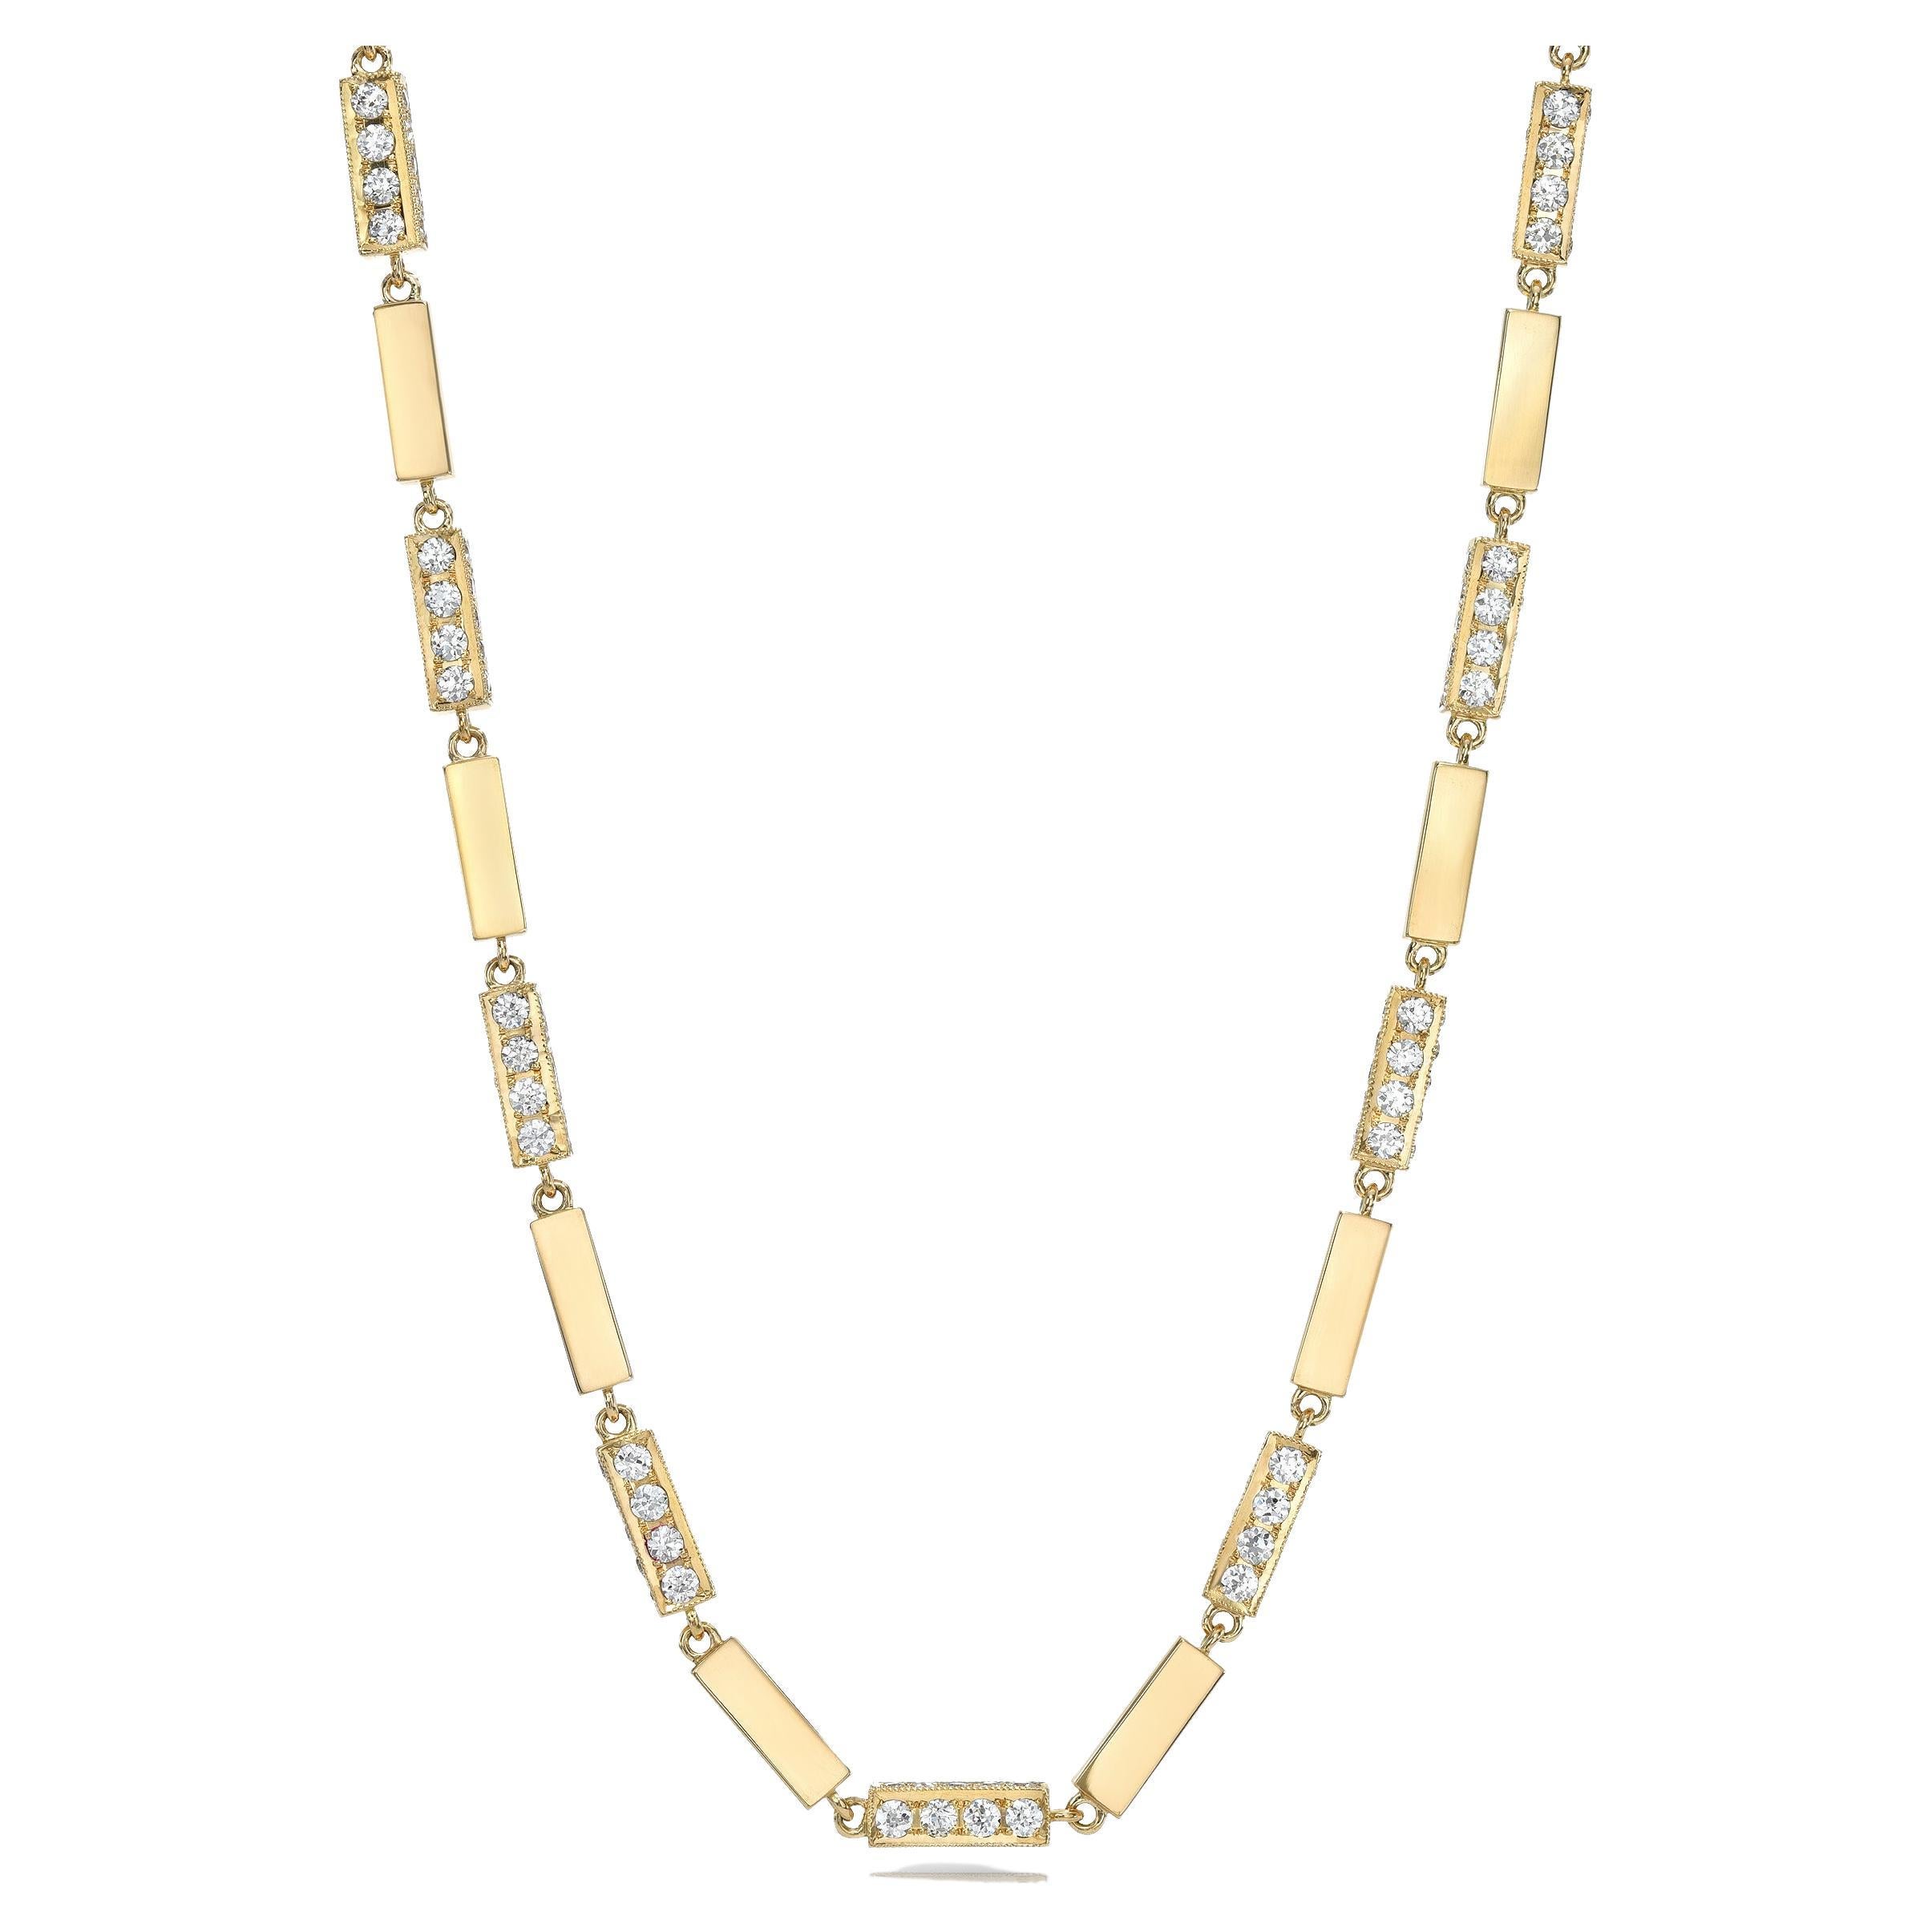 Handcrafted Giana Necklace with Diamonds by Single Stone. For Sale